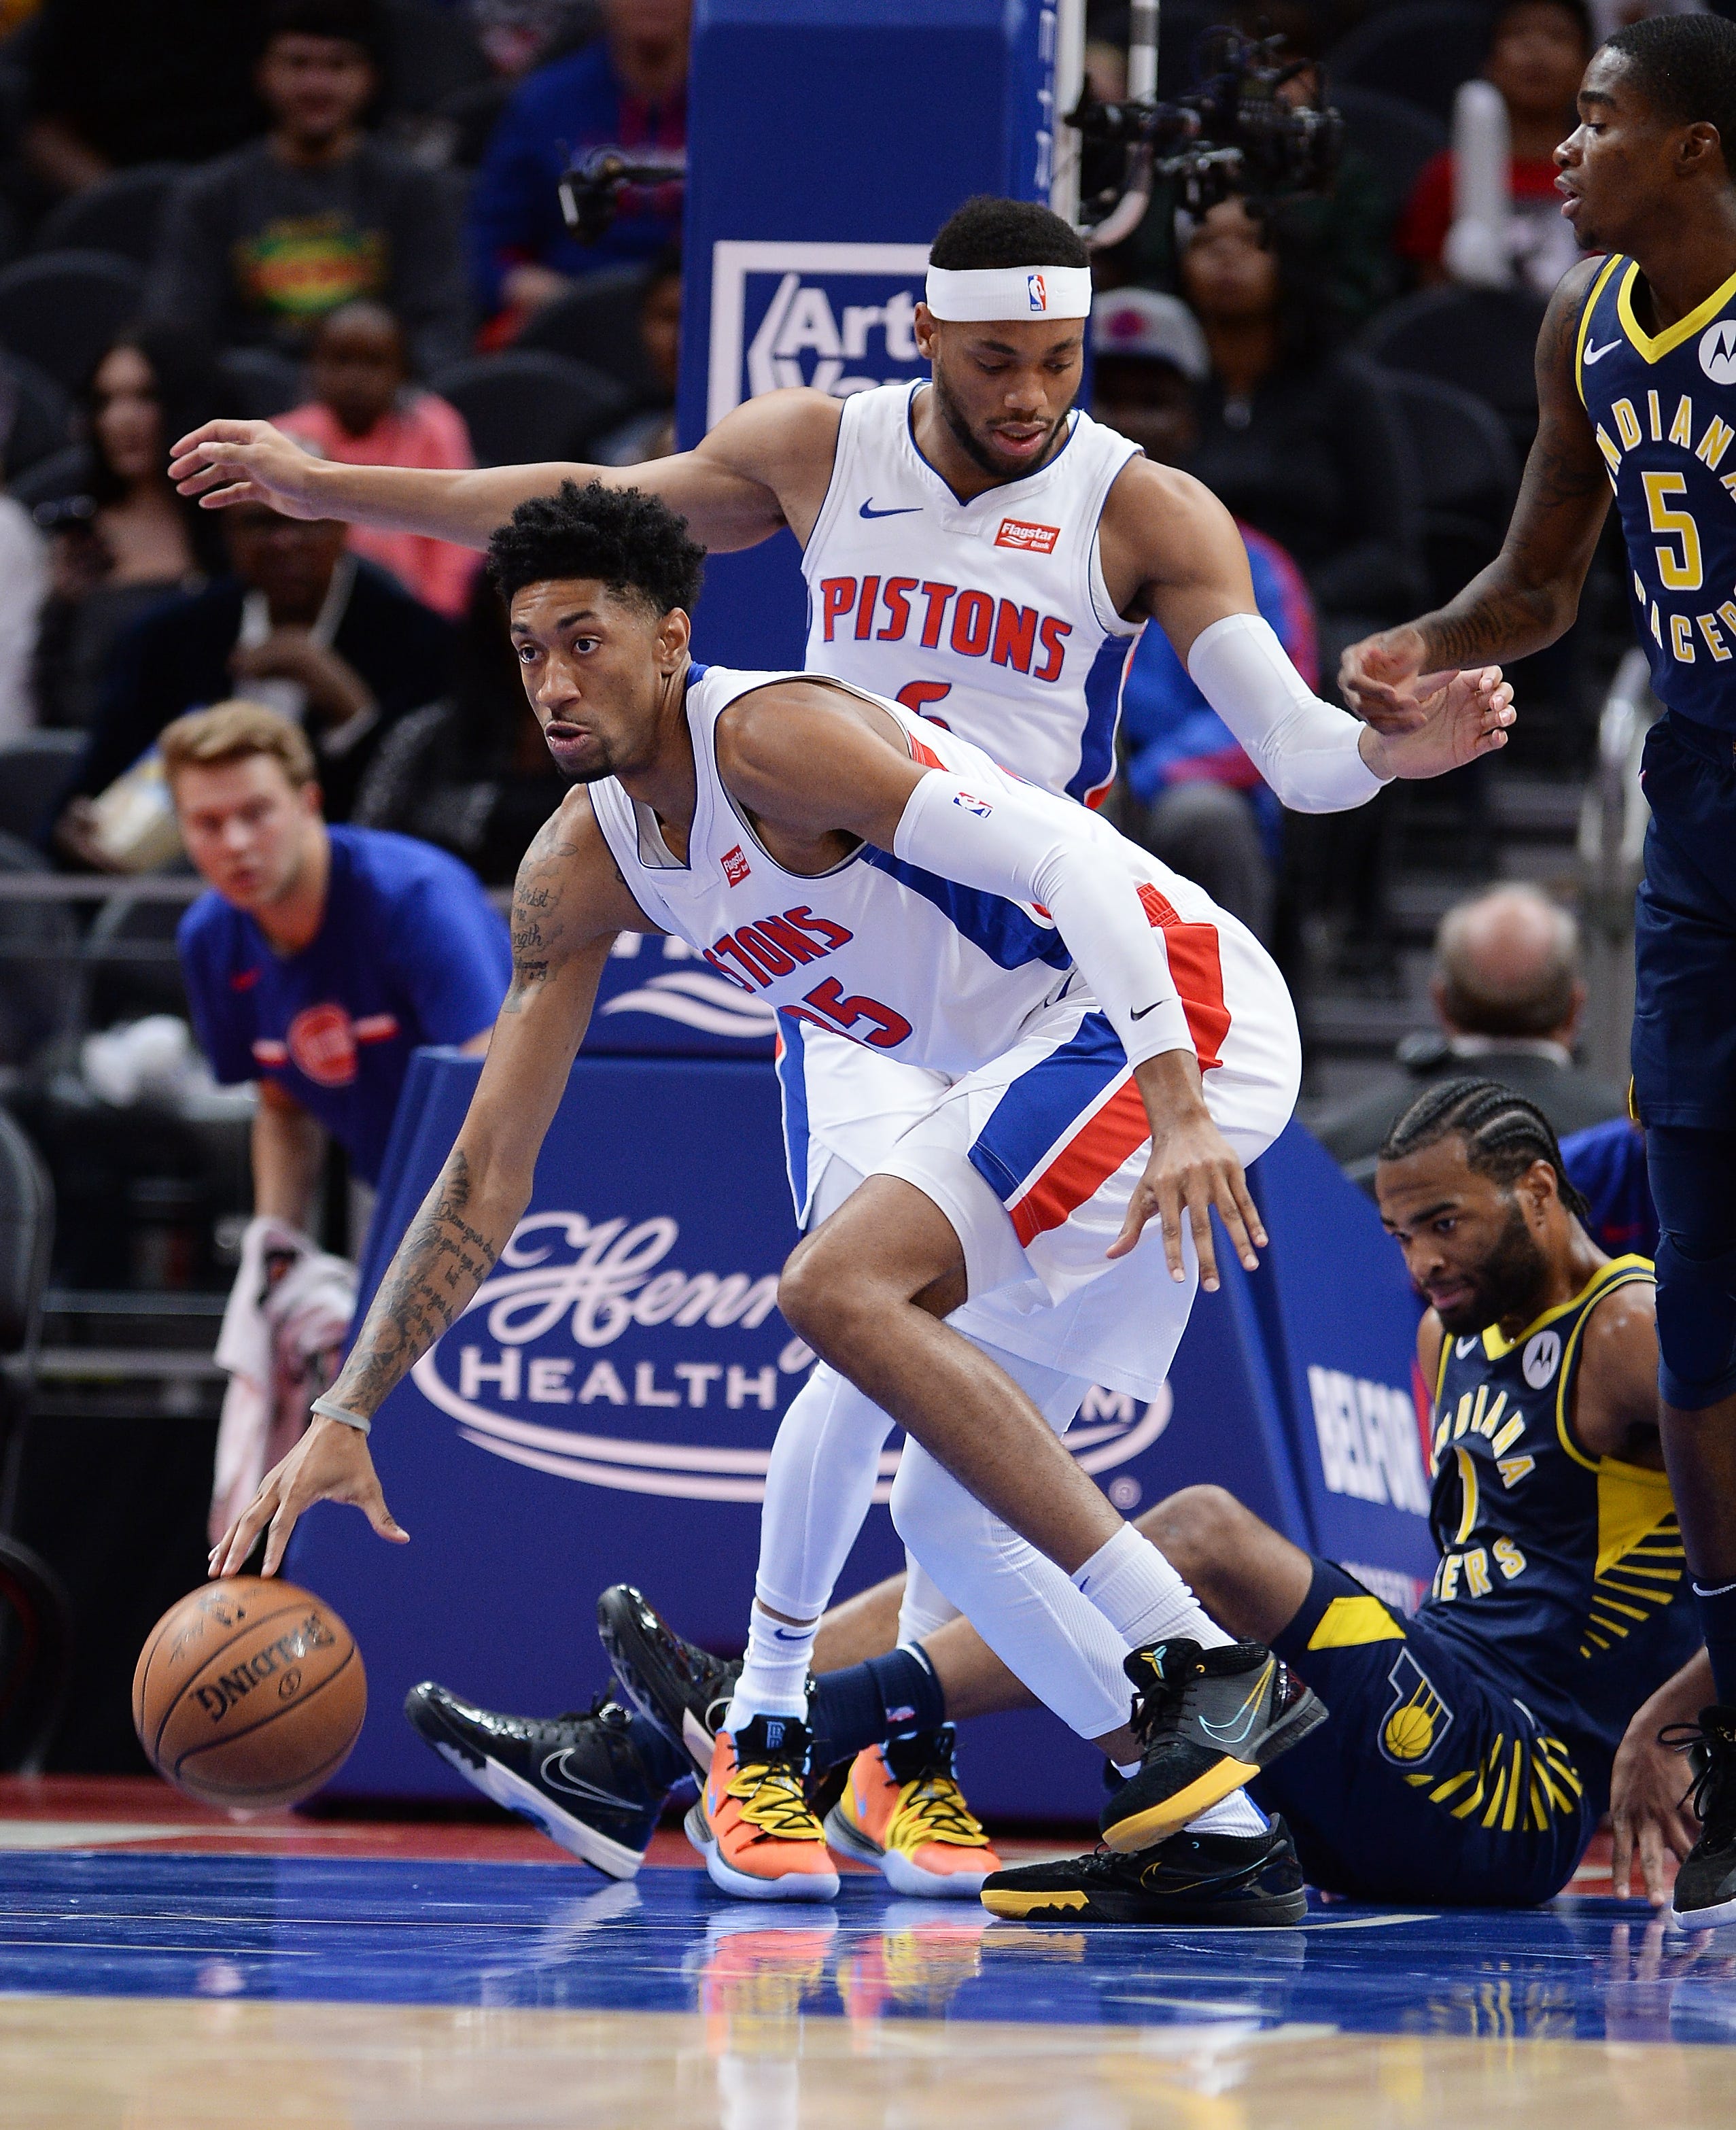 Pistons' Christian Wood grabs a rebound and leads the fast break during action in the first quarter.